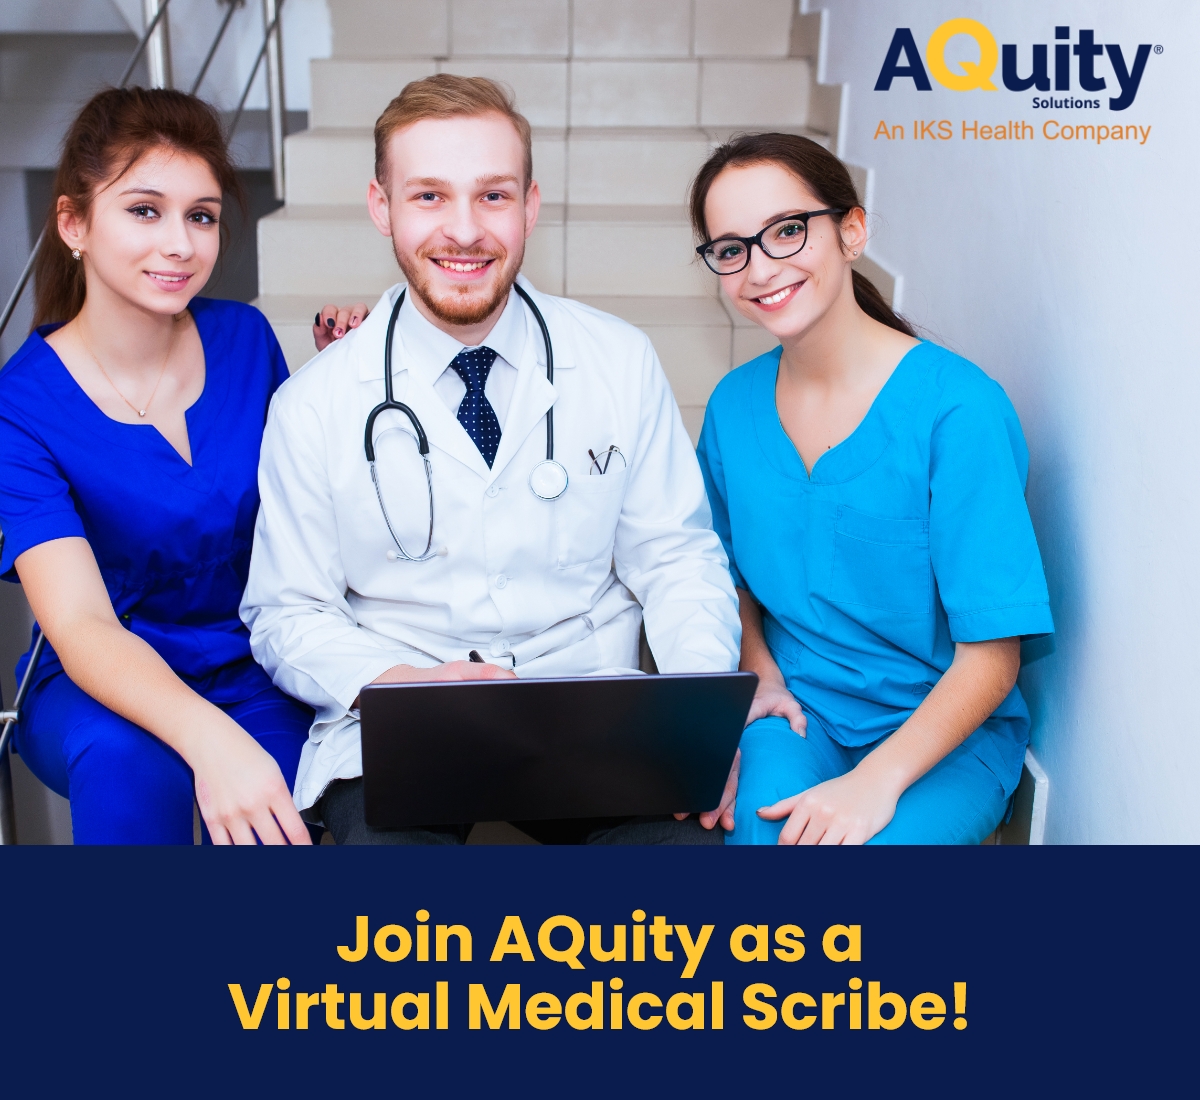 Looking for some healthcare experience! Join our team! aquitysolutions.com/aquity-careers/
#HealthcareJobs #MedStudents